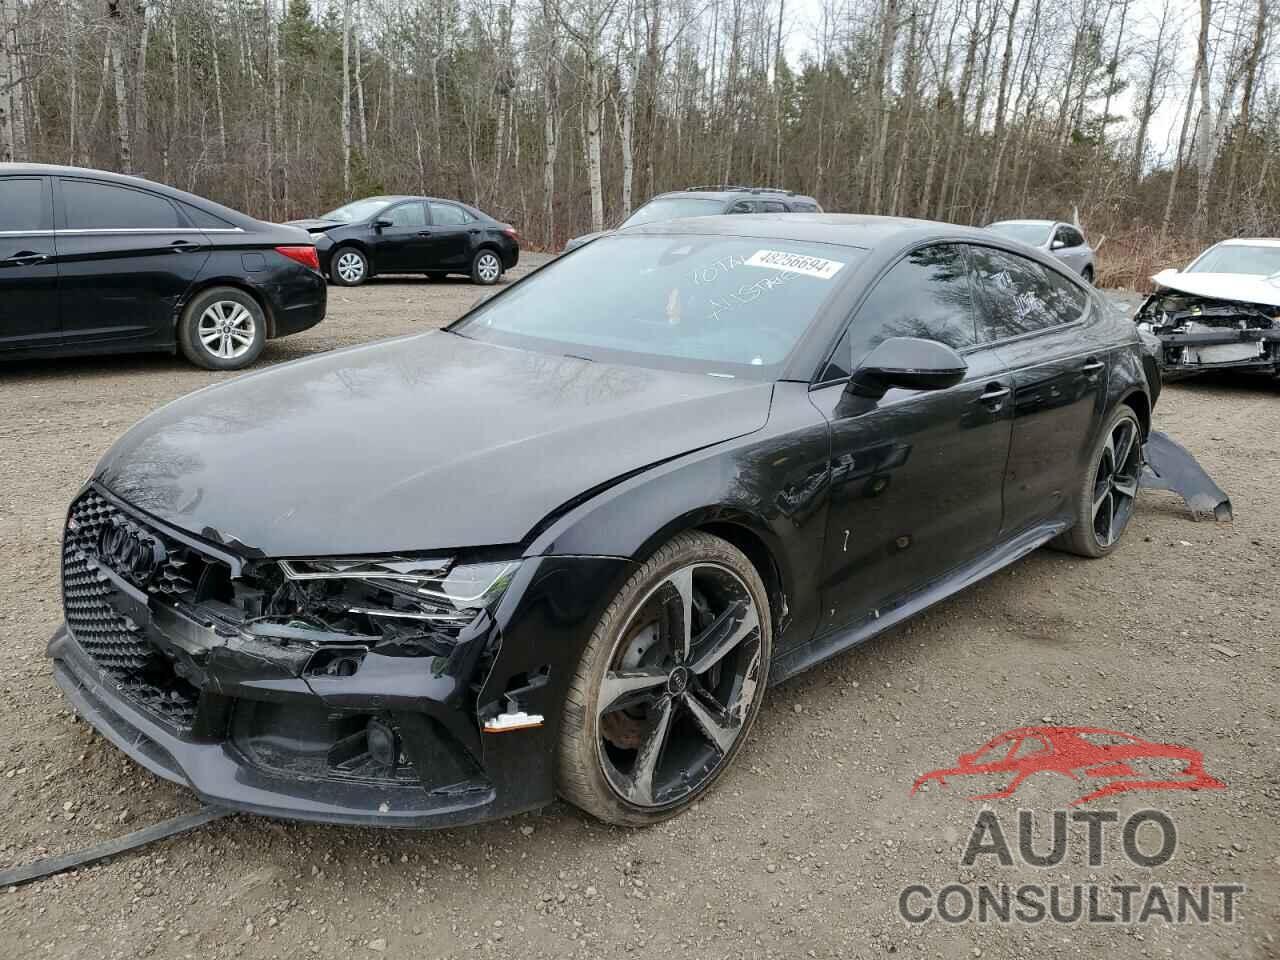 AUDI S7/RS7 2016 - WUAW2AFC2GN900135